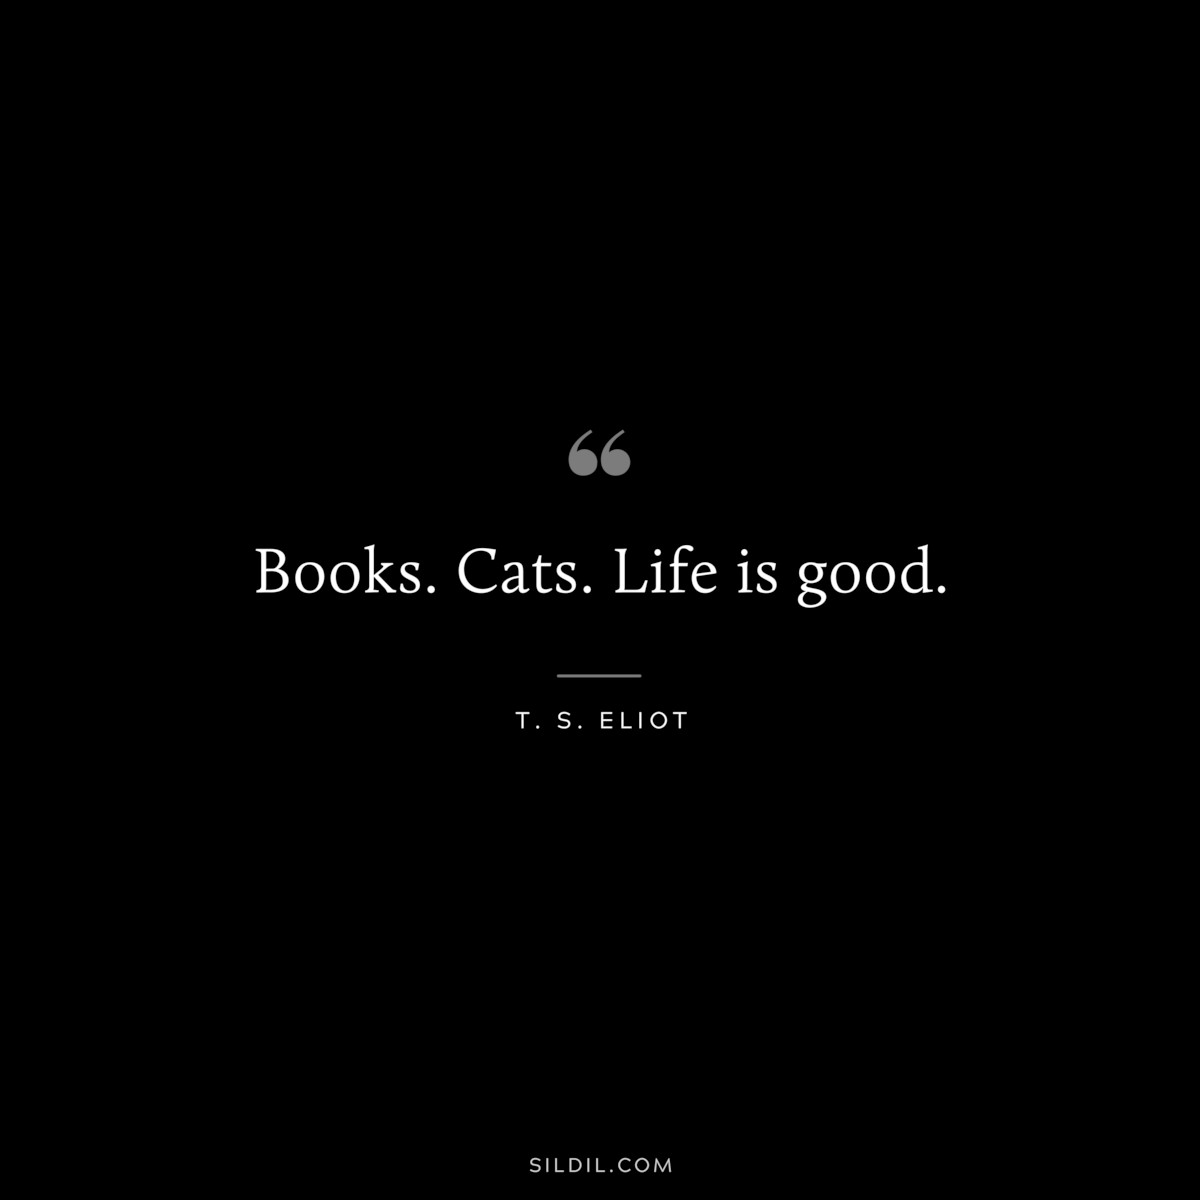 Books. Cats. Life is good. ― T. S. Eliot